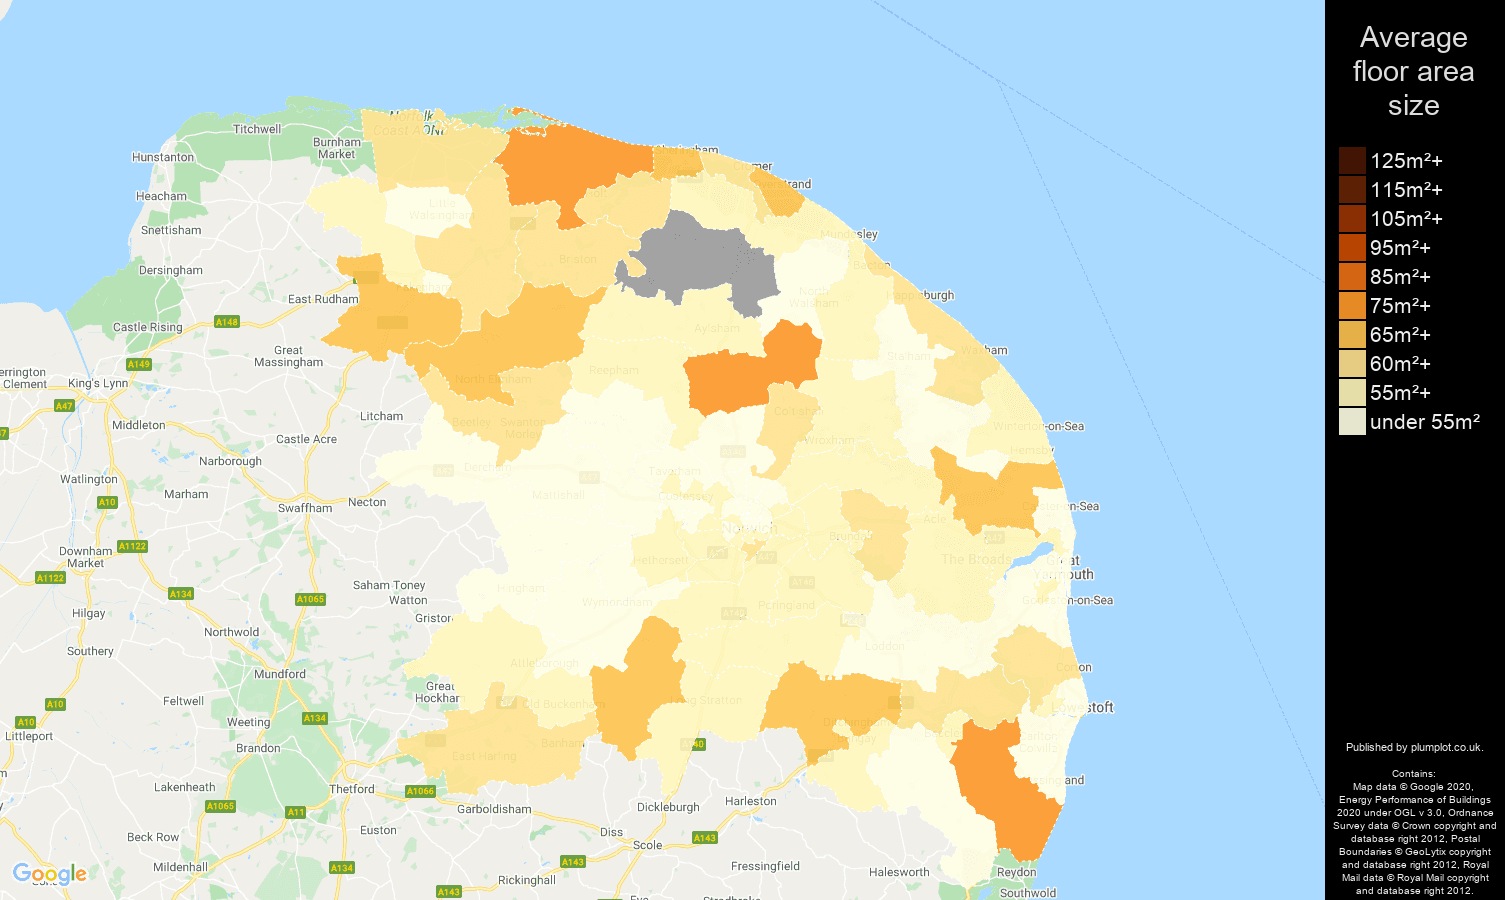 Norwich map of average floor area size of flats